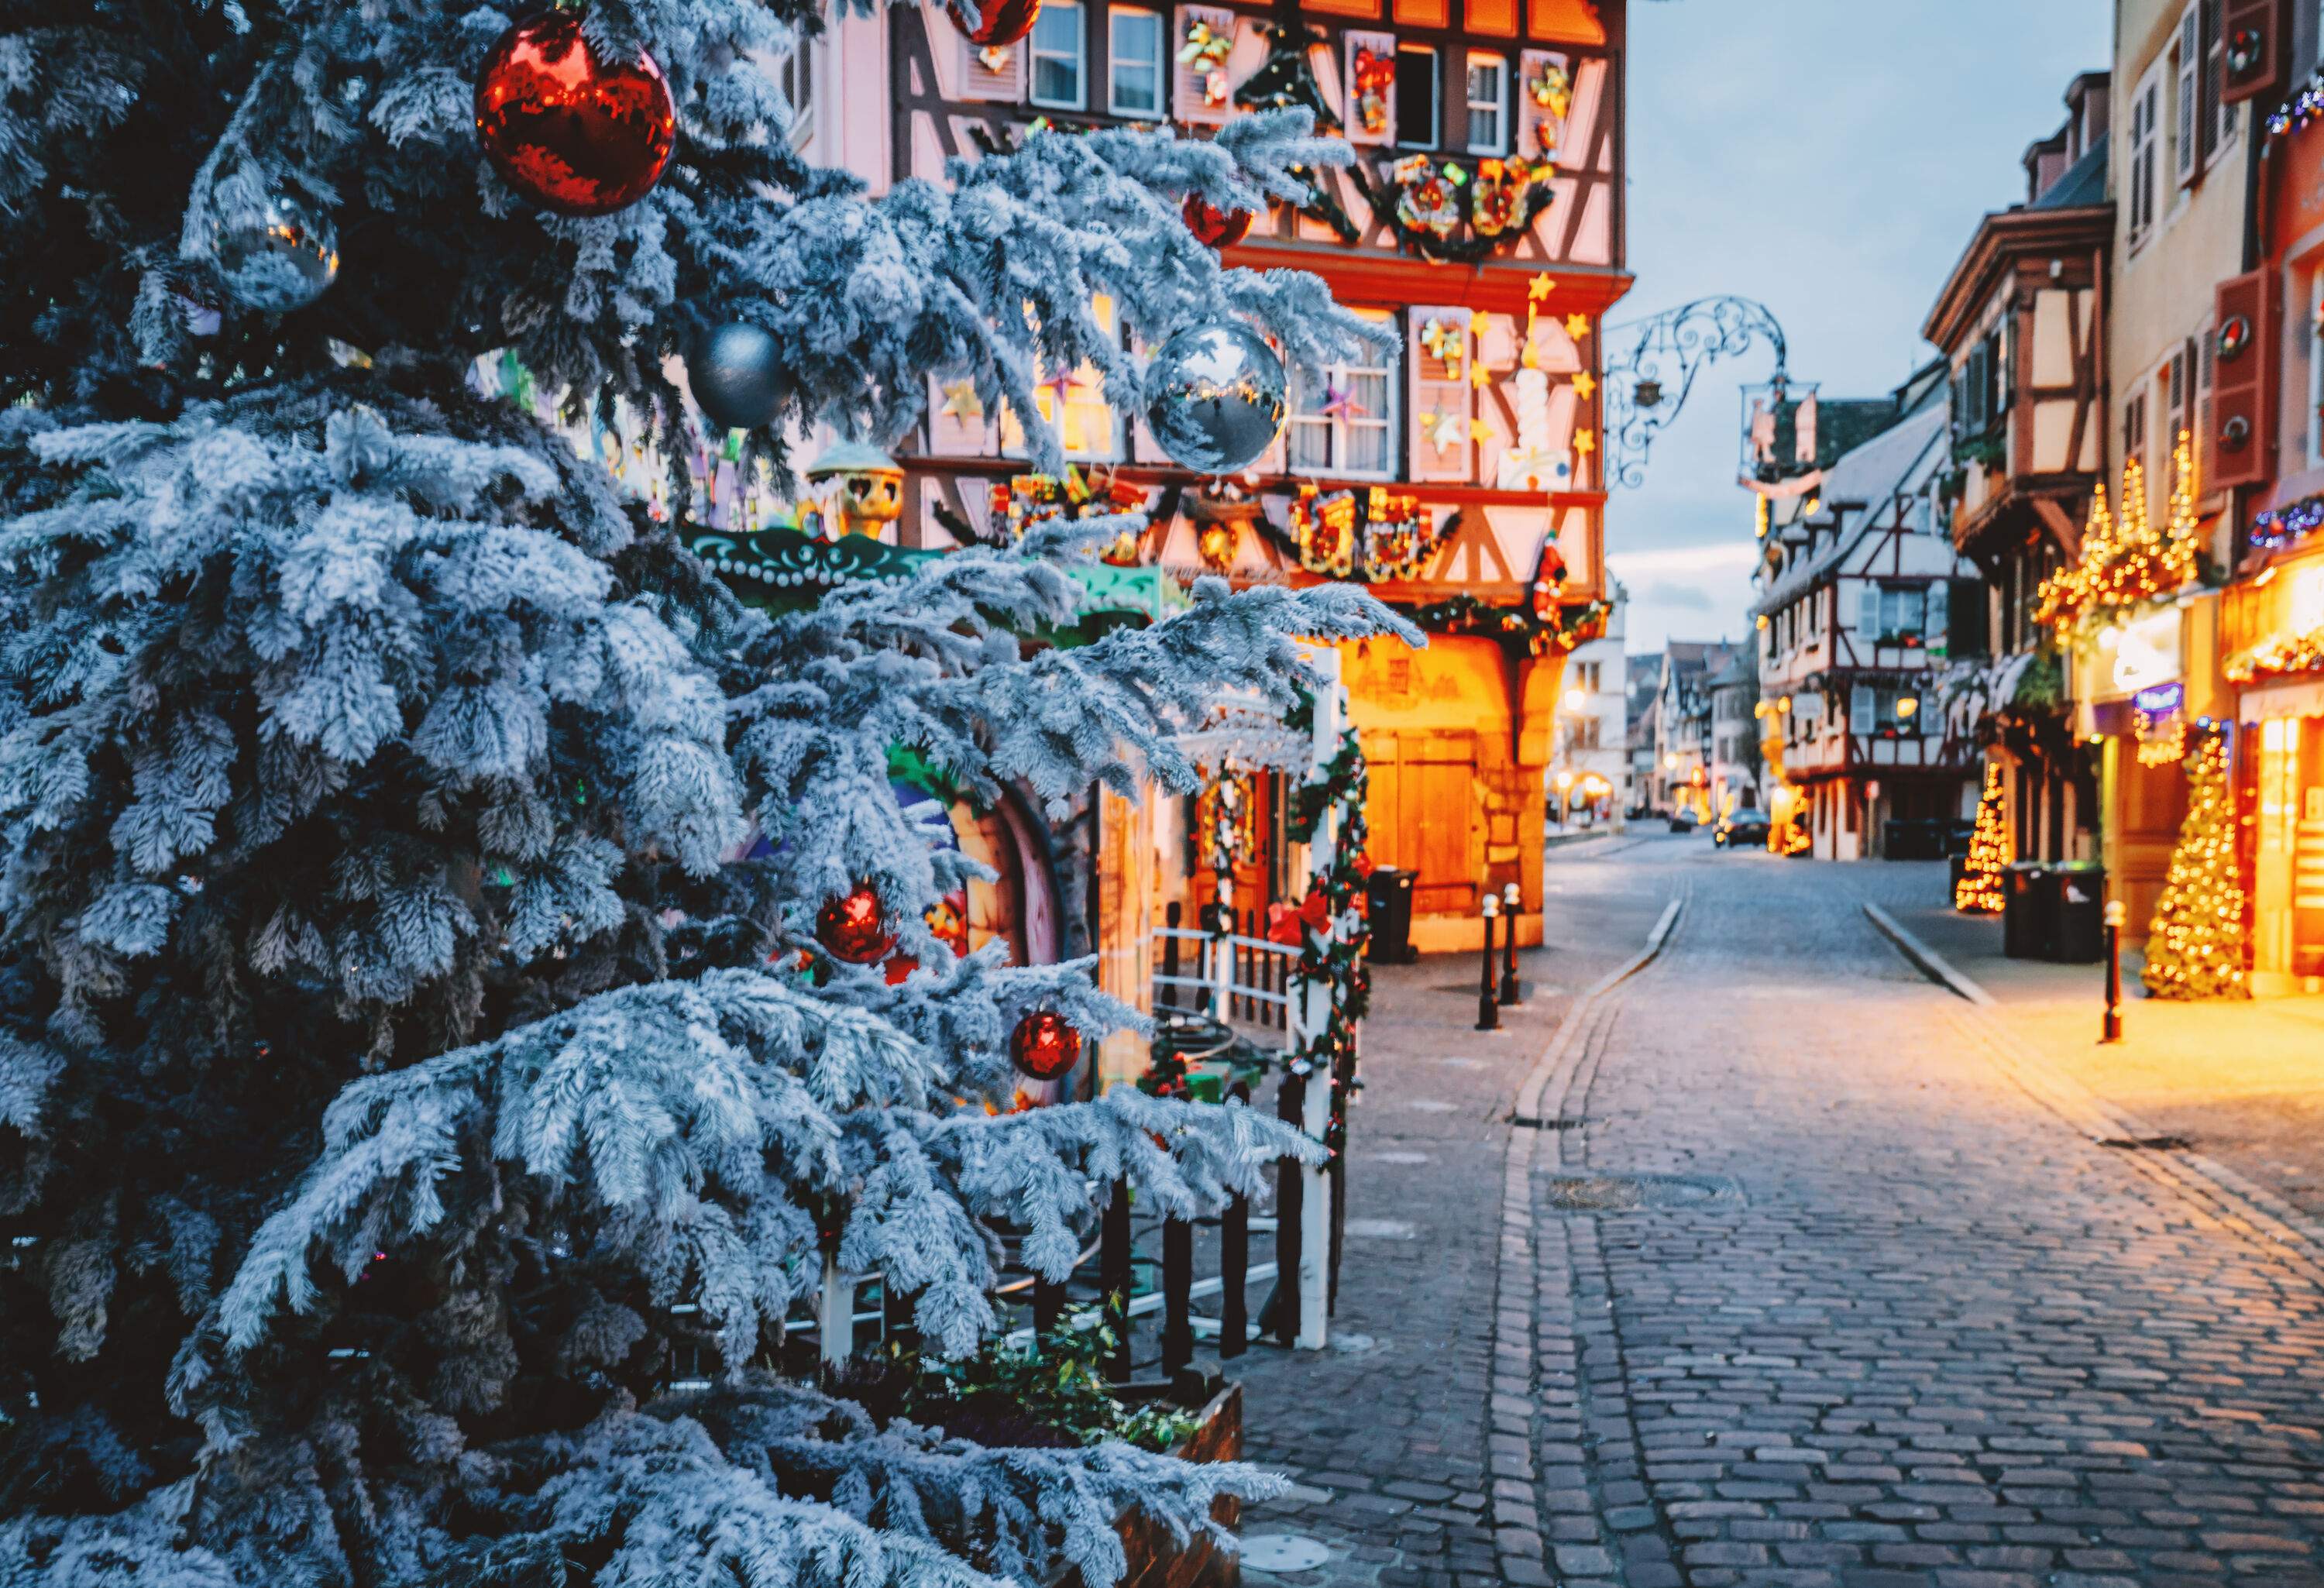 A cobbled street lined with half-timbered houses decorated with various colourful Christmas ornamentals and Christmas lights lightly covered in snow.